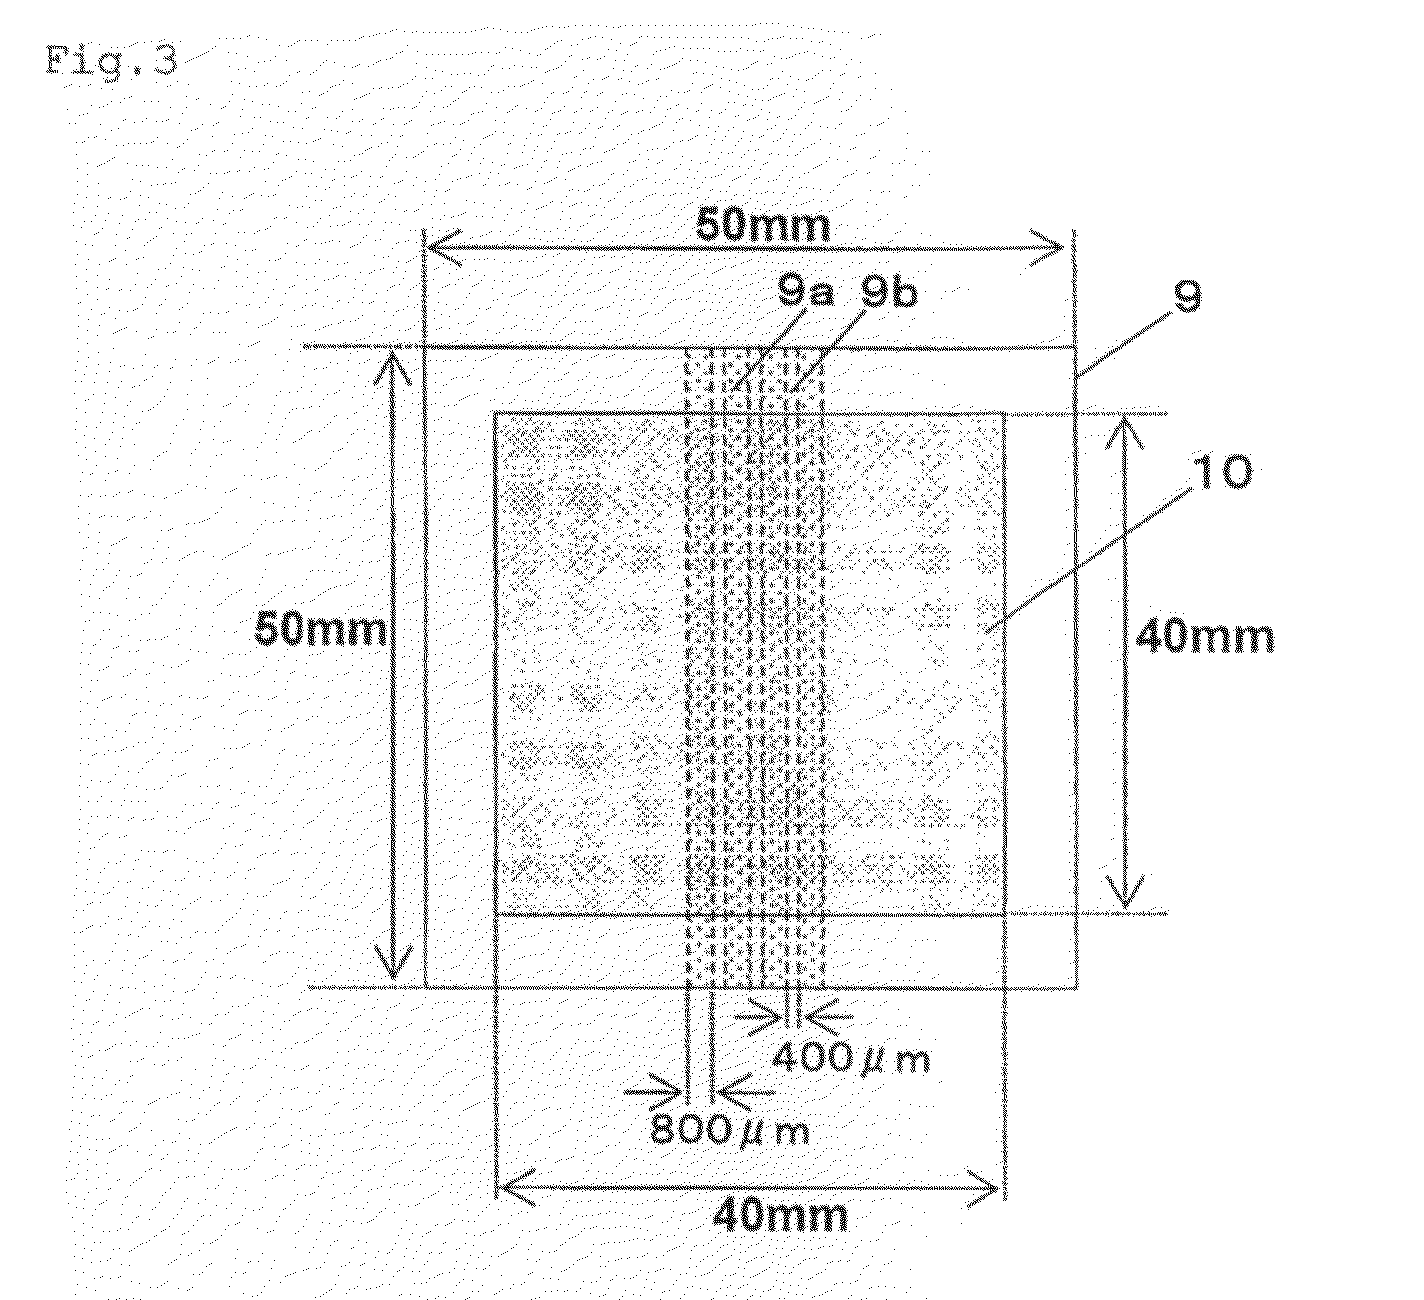 Double-coated pressure sensitive adhesive sheet for fixing hard disk drive component and hard disk drive